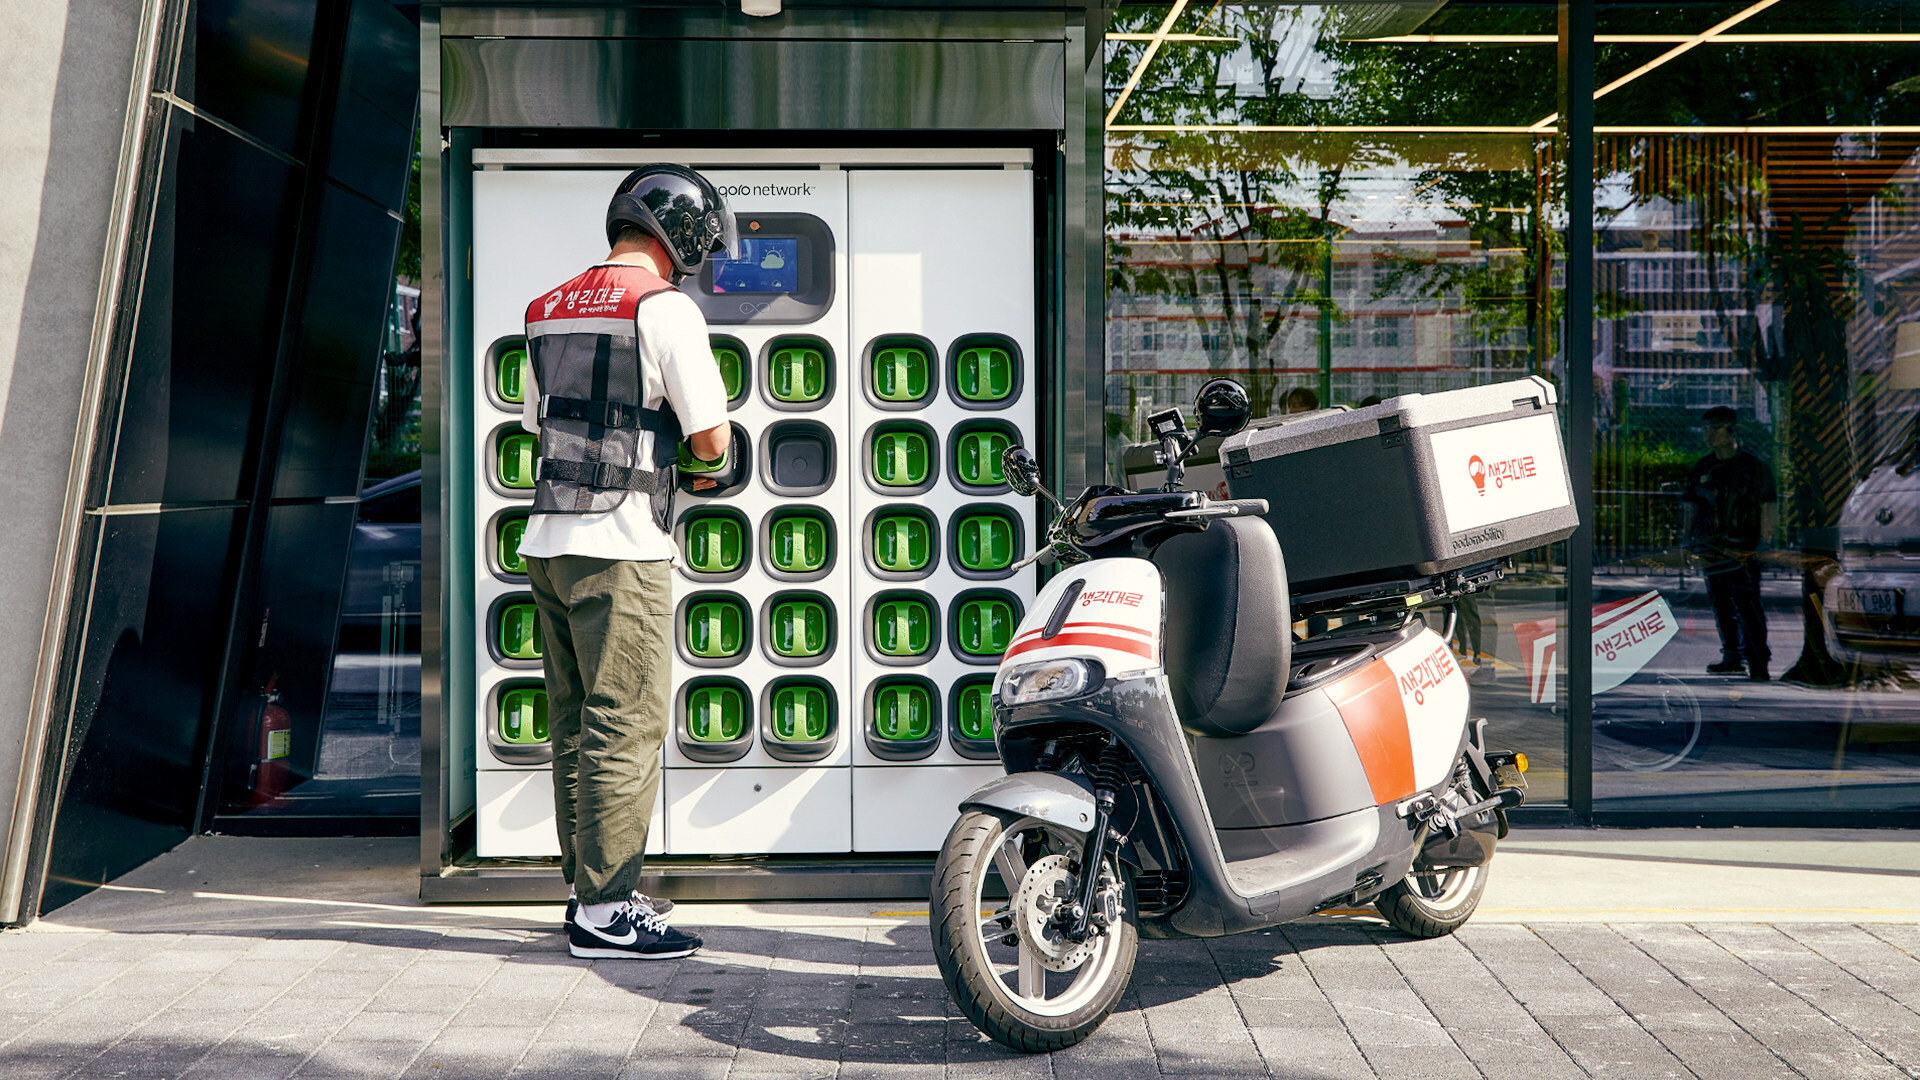 “It is great to be growing our partnership with Bikebank, a company that shares similar values and is committed to accelerating the shift to electric transportation in Korea. Seoul has one of the largest food delivery ecosystems in the world and was one of the first markets to embrace Gogoro battery swapping for food deliveries,” said Horace Luke, founder, and CEO of Gogoro.